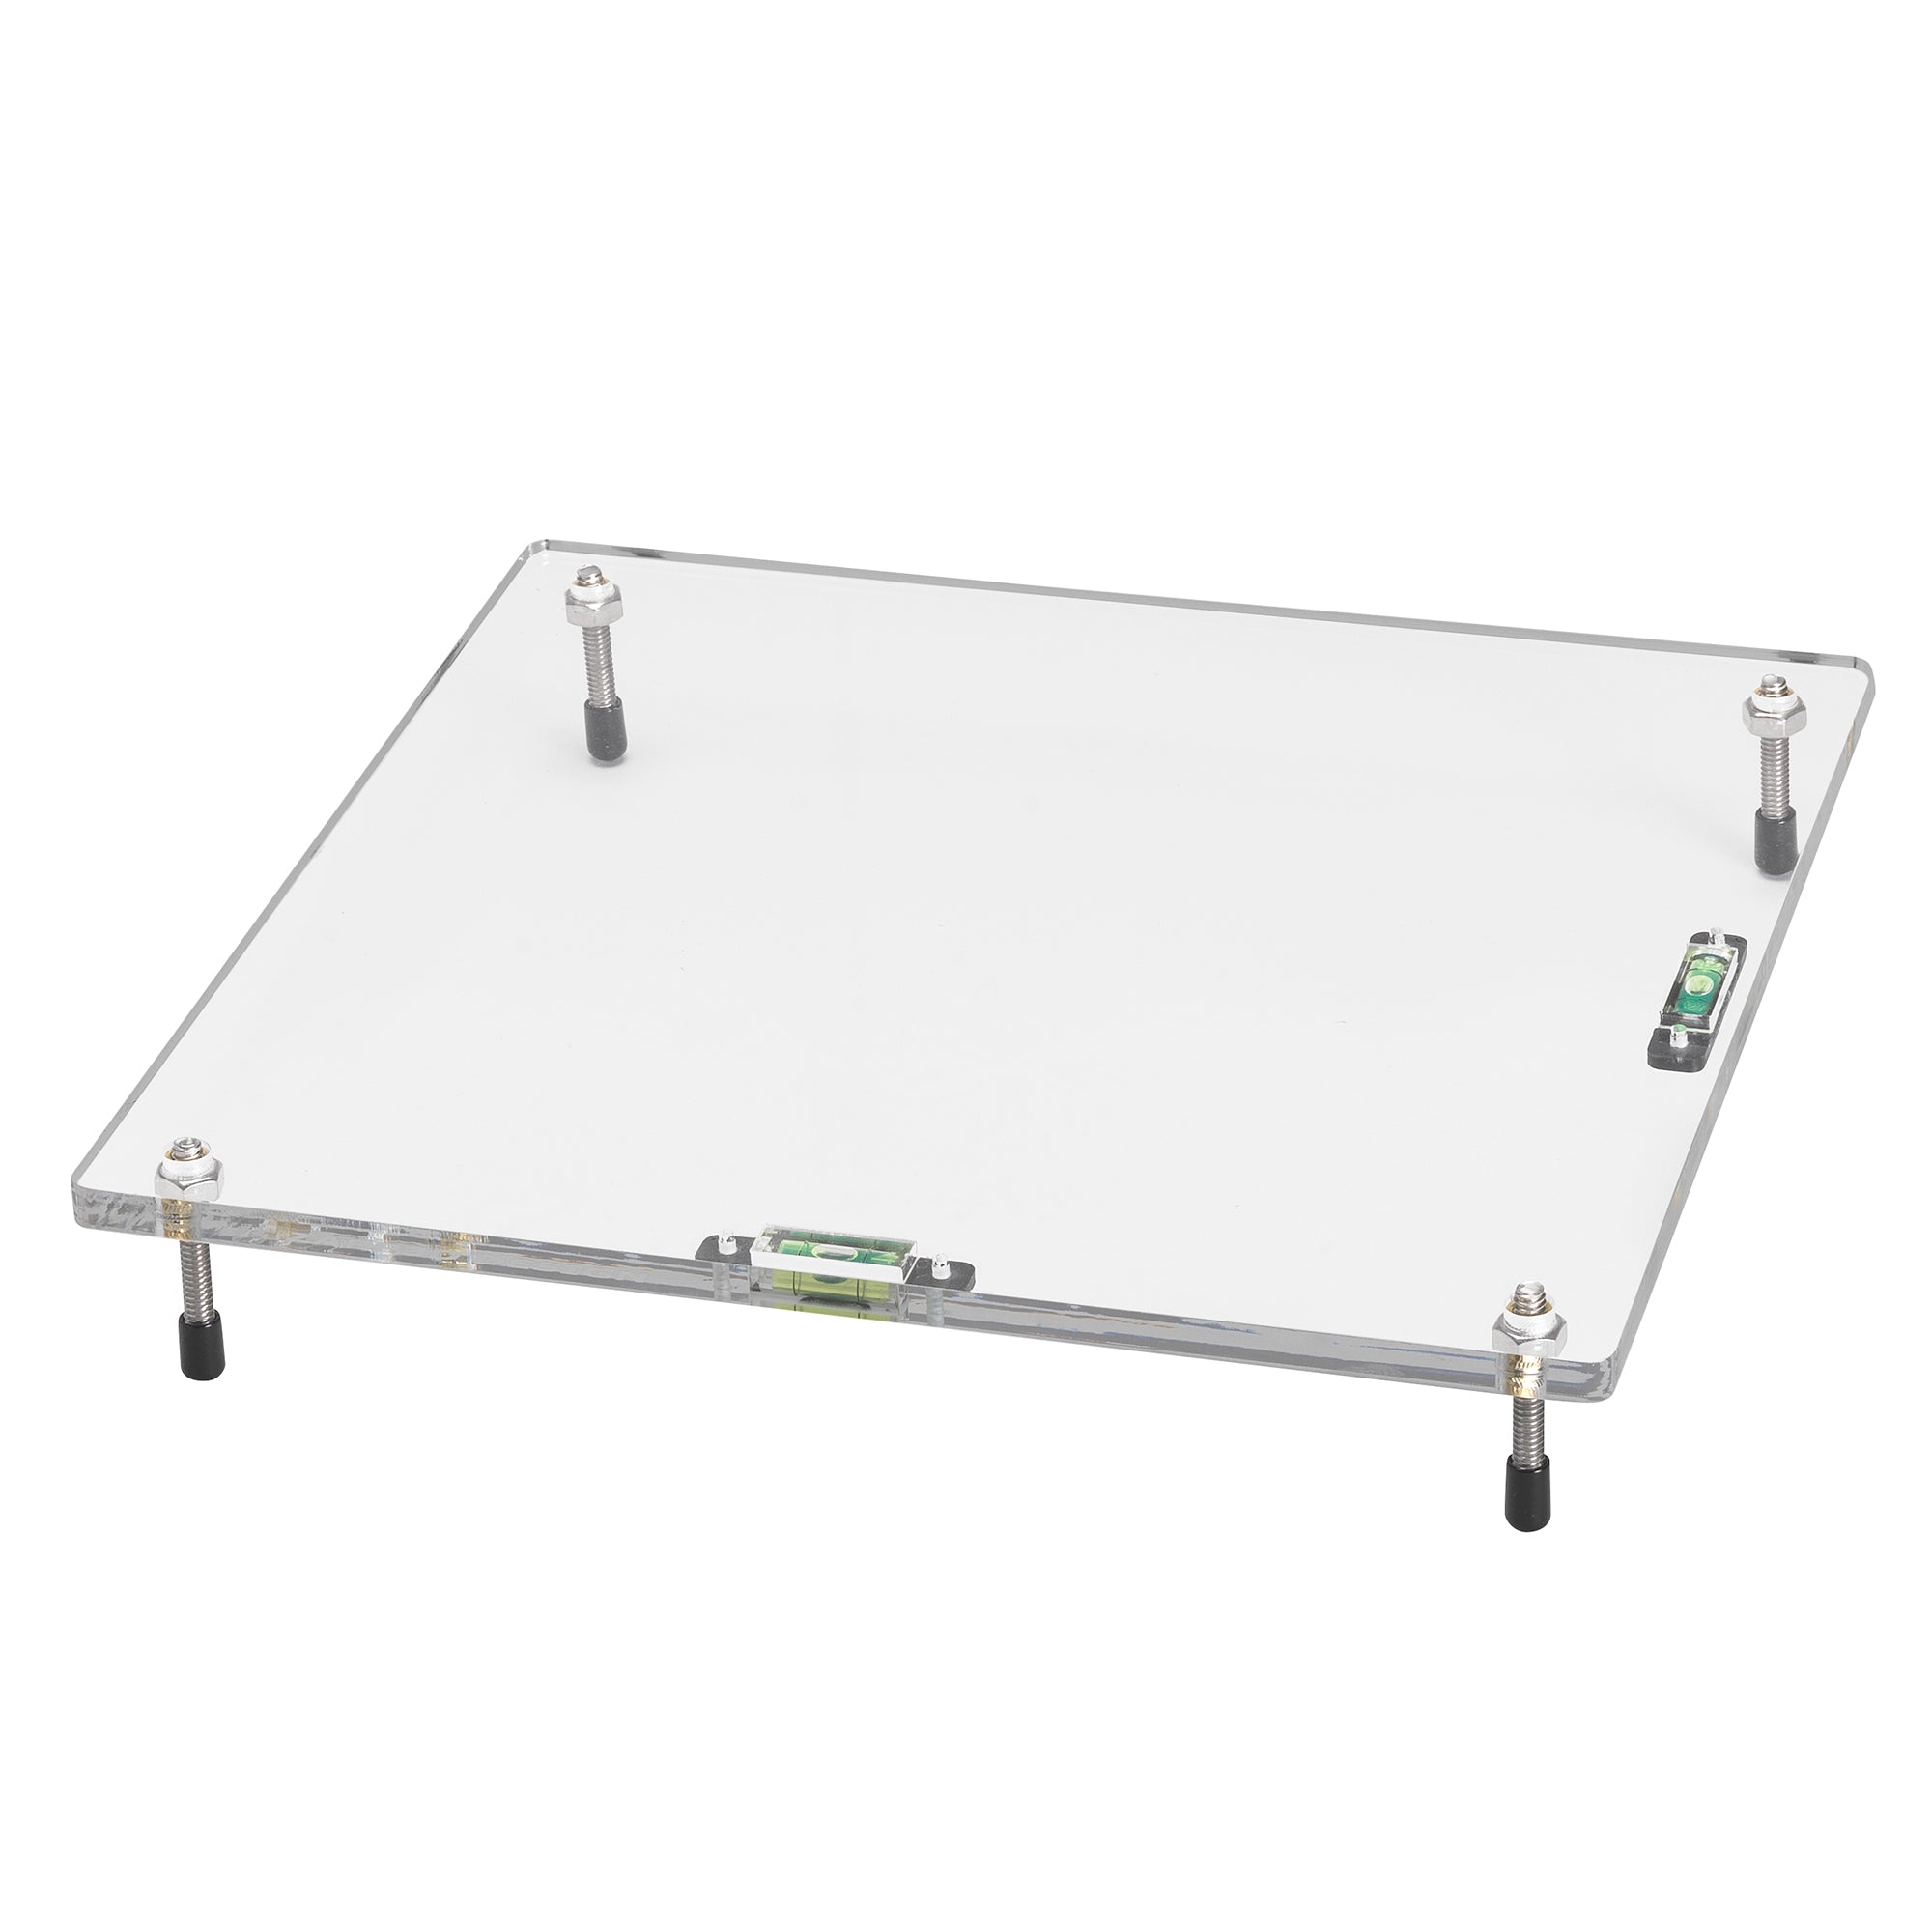 Alritz Resin Leveling Table, 16''x 12'' Adjustable Epoxy Resin Self  Leveling Board with Bubble Level 2.4 Inch for Resin Molds Accessories Paint